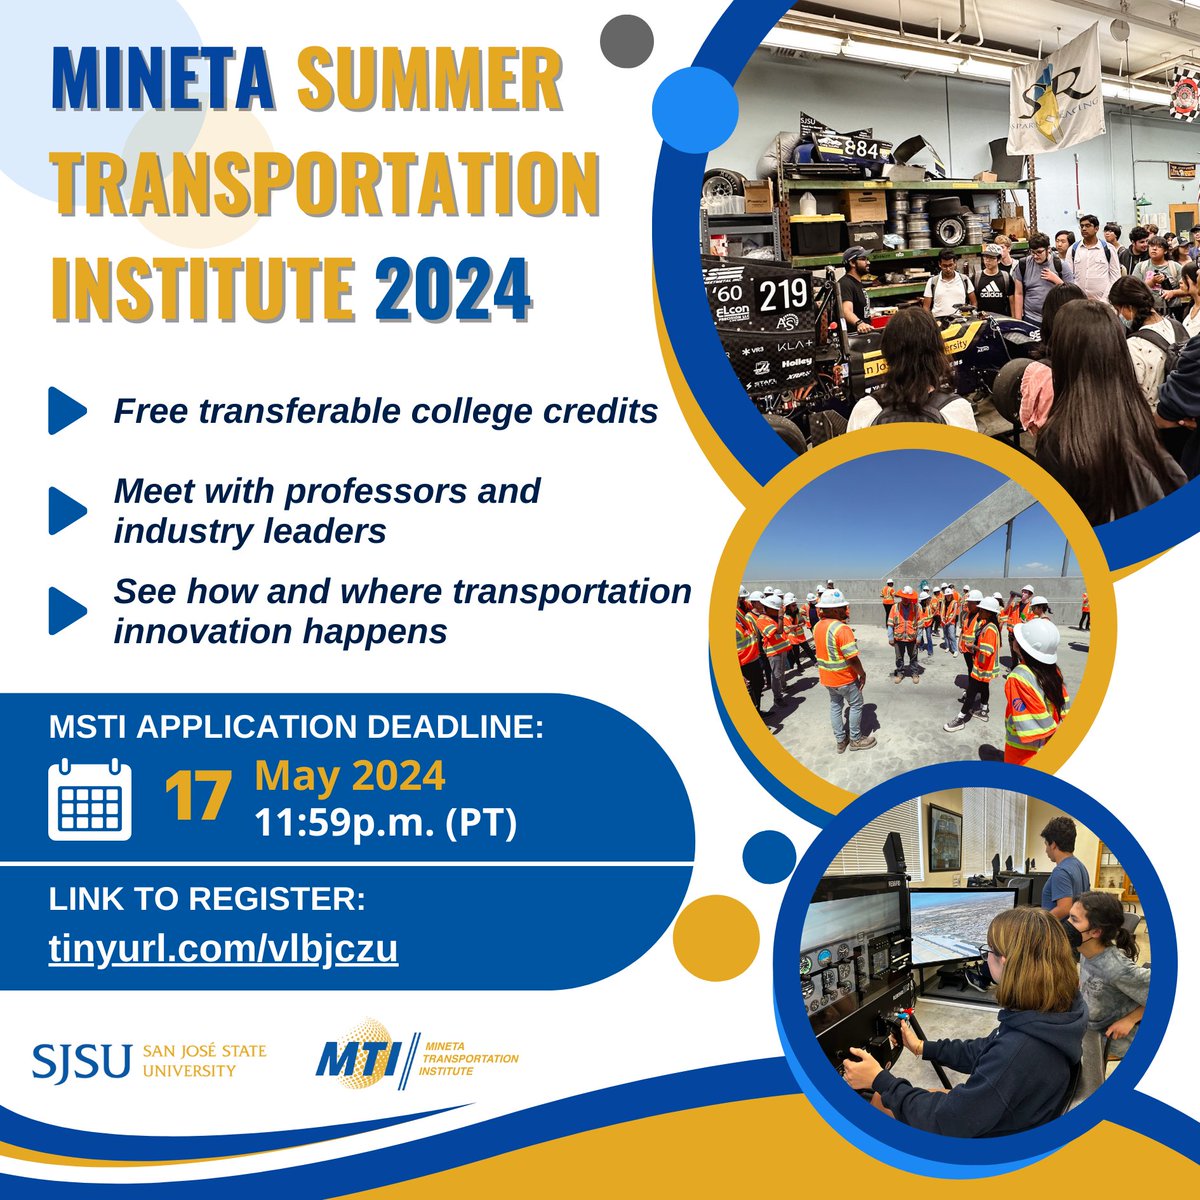 Free college credits are calling! Earn them at the Mineta Summer Transportation Institute and get ahead in your studies and transportation career. Answer the call: transweb.sjsu.edu/workforce-deve… #summerprogram #collegecredit #STEM #STEMeducation